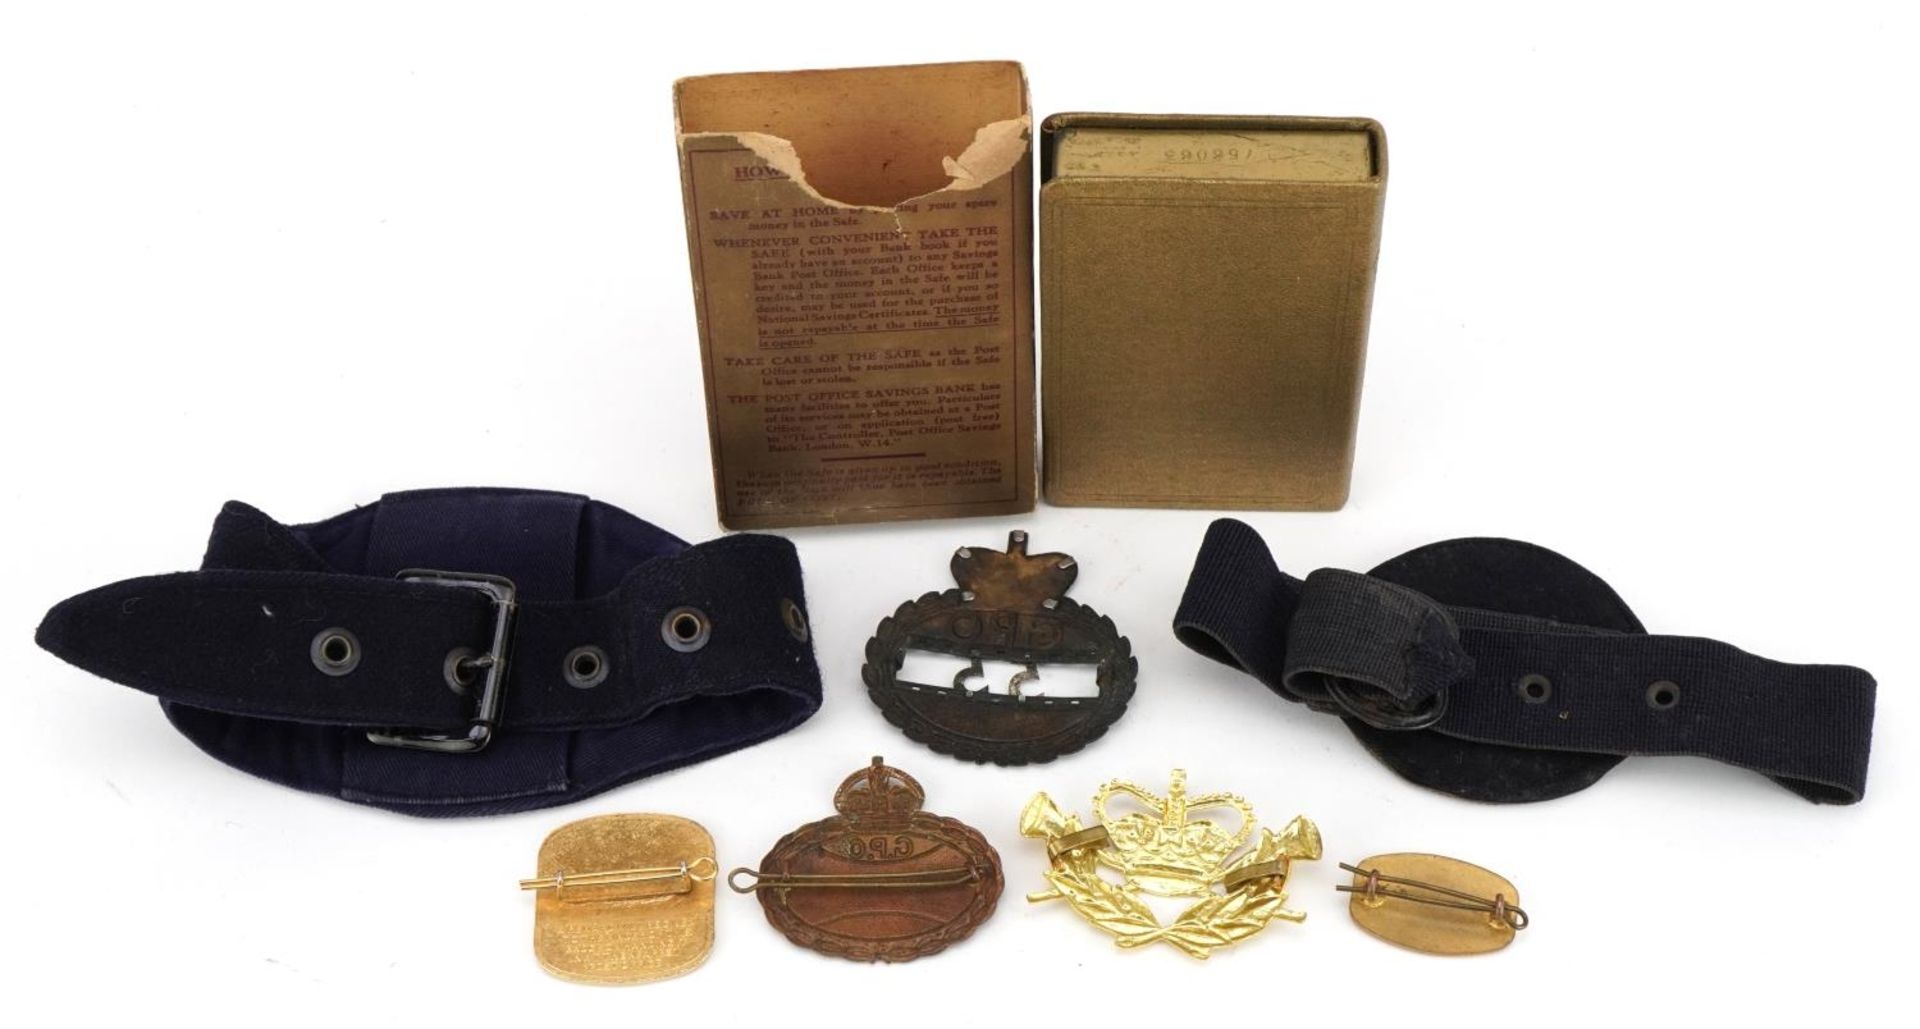 Post Office collectables including early postman armband, badges and Savings Bank - Image 4 of 5